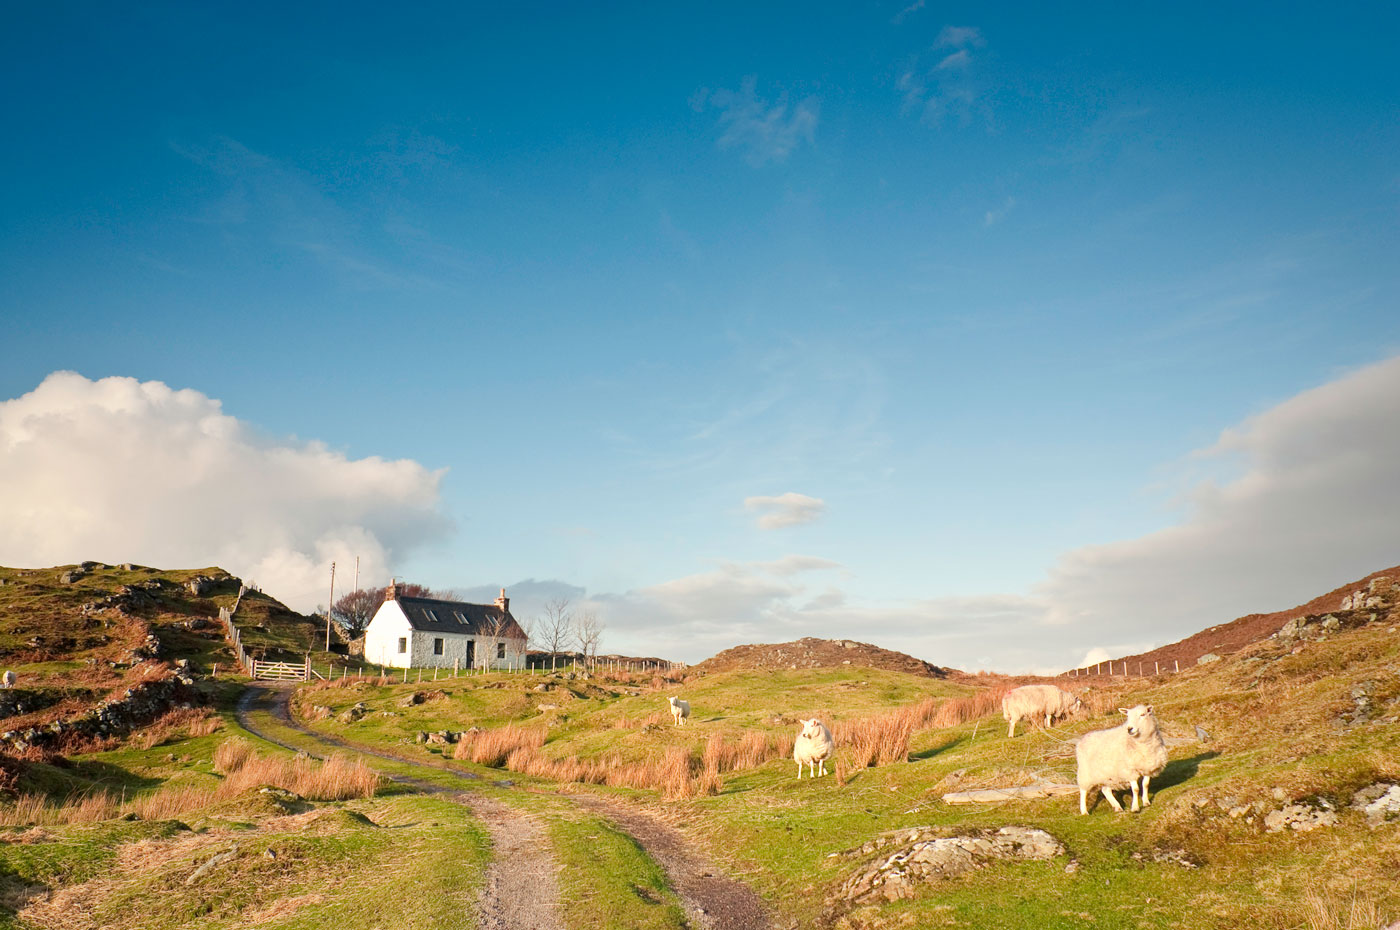 Sheep on a moor with a homestead in the distance